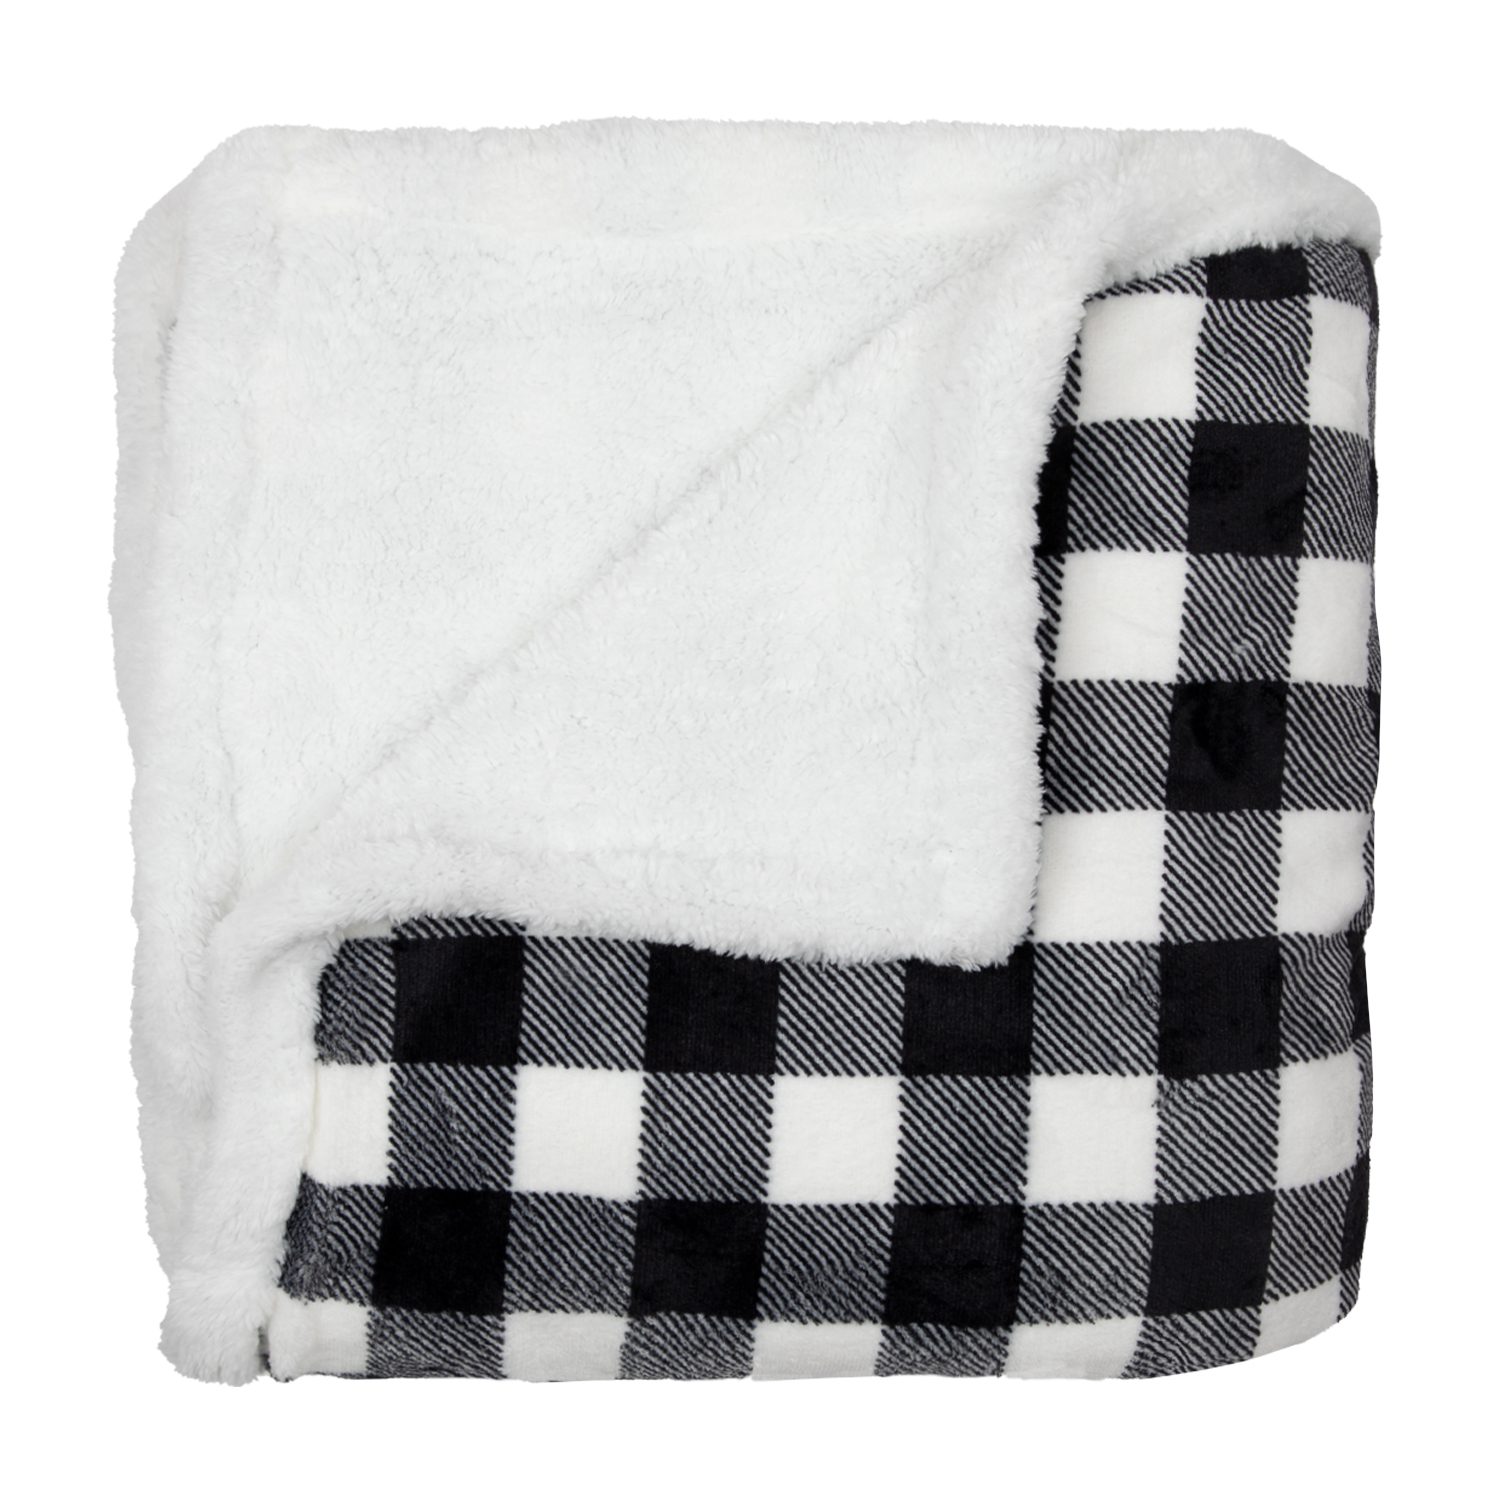 Rustic Home Throws - Arkwright Home